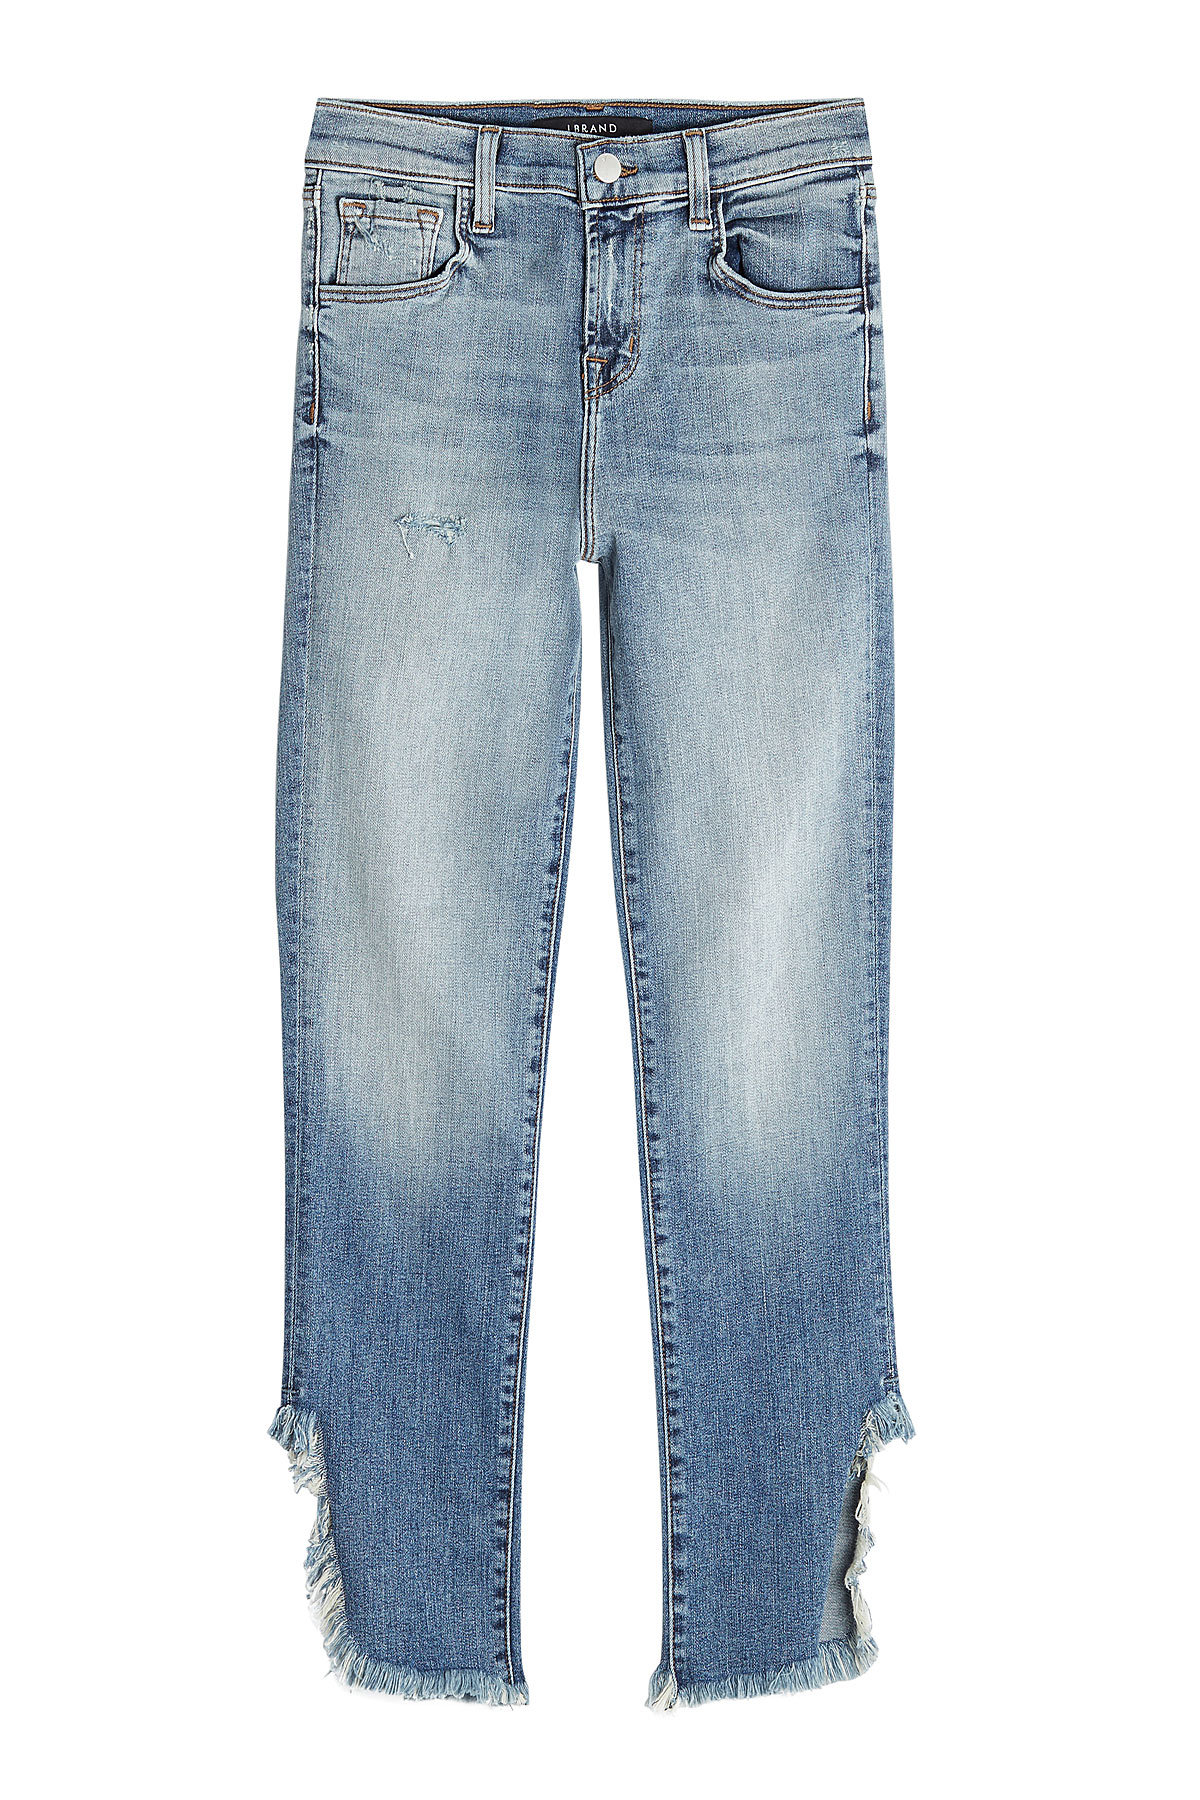 J Brand - Ruby High-Rise Cropped Cigarette Jeans